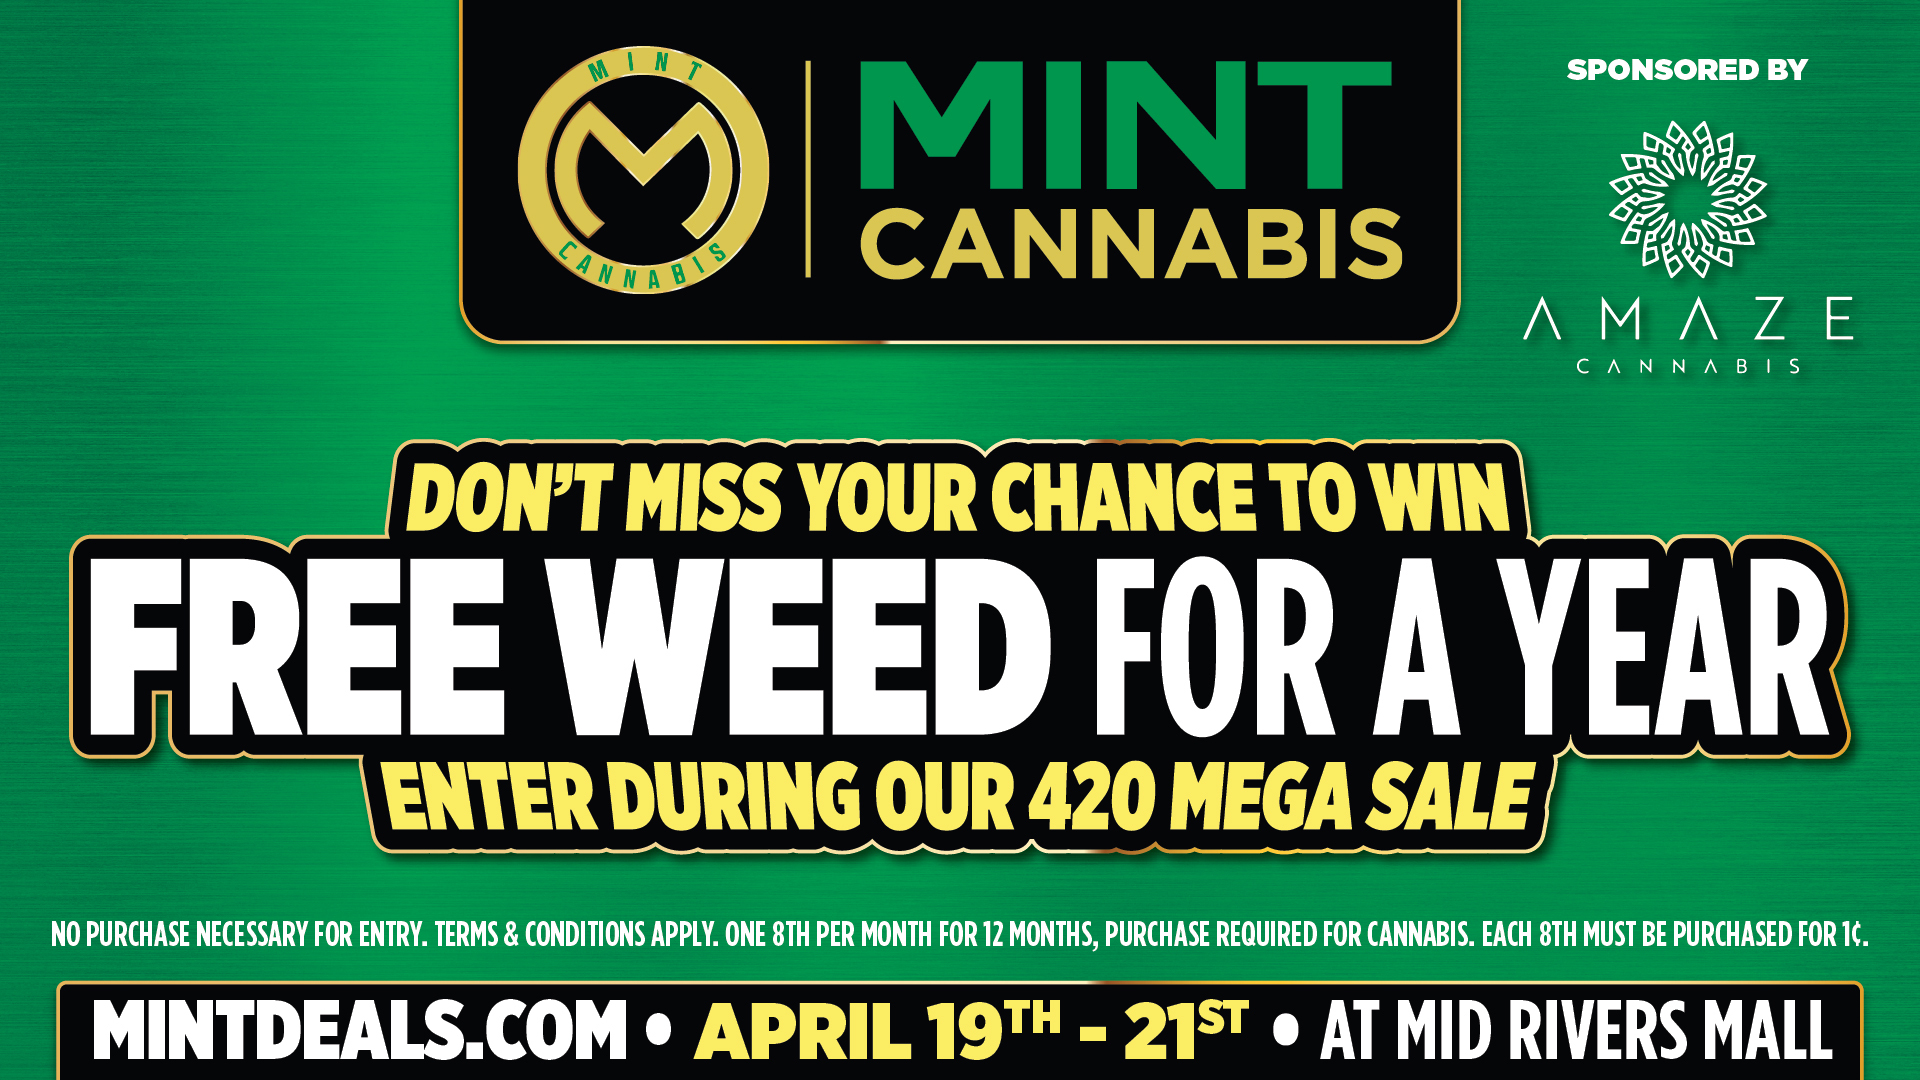 Win Free Weed for a Year at the 420 Mega Sale in Missouri - Join the celebration and become the lucky winner